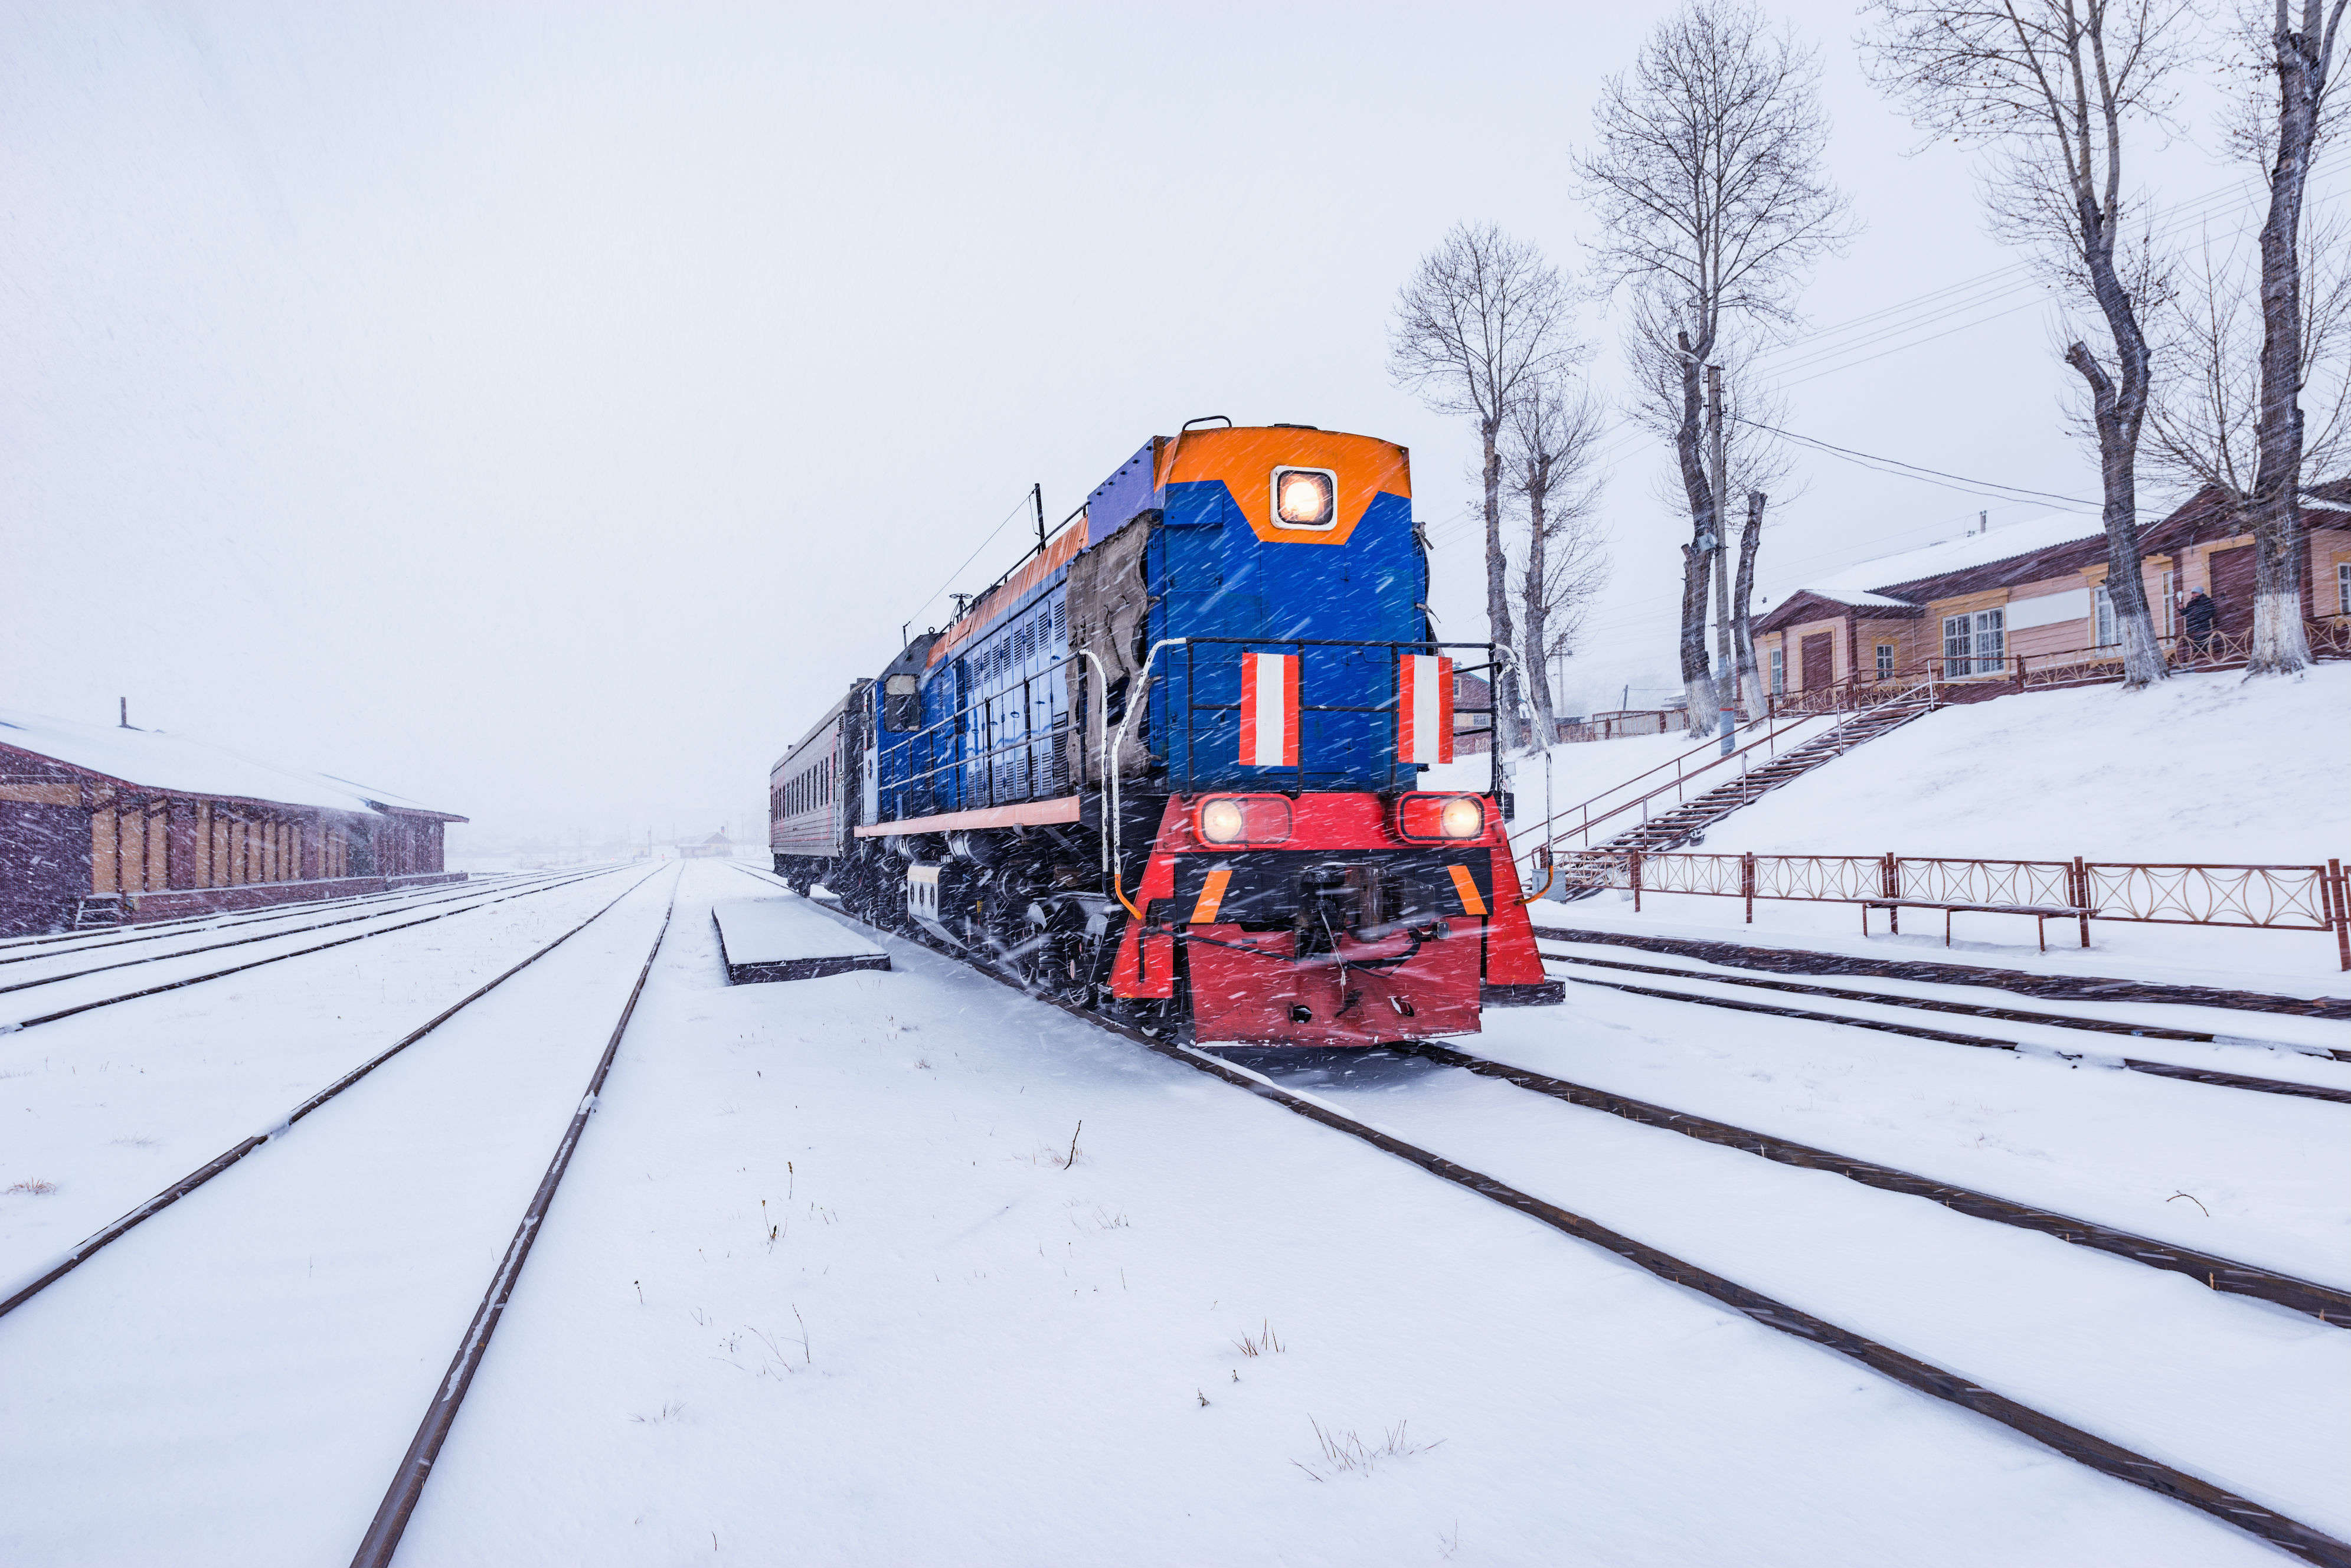 real russia trans siberian trip planner